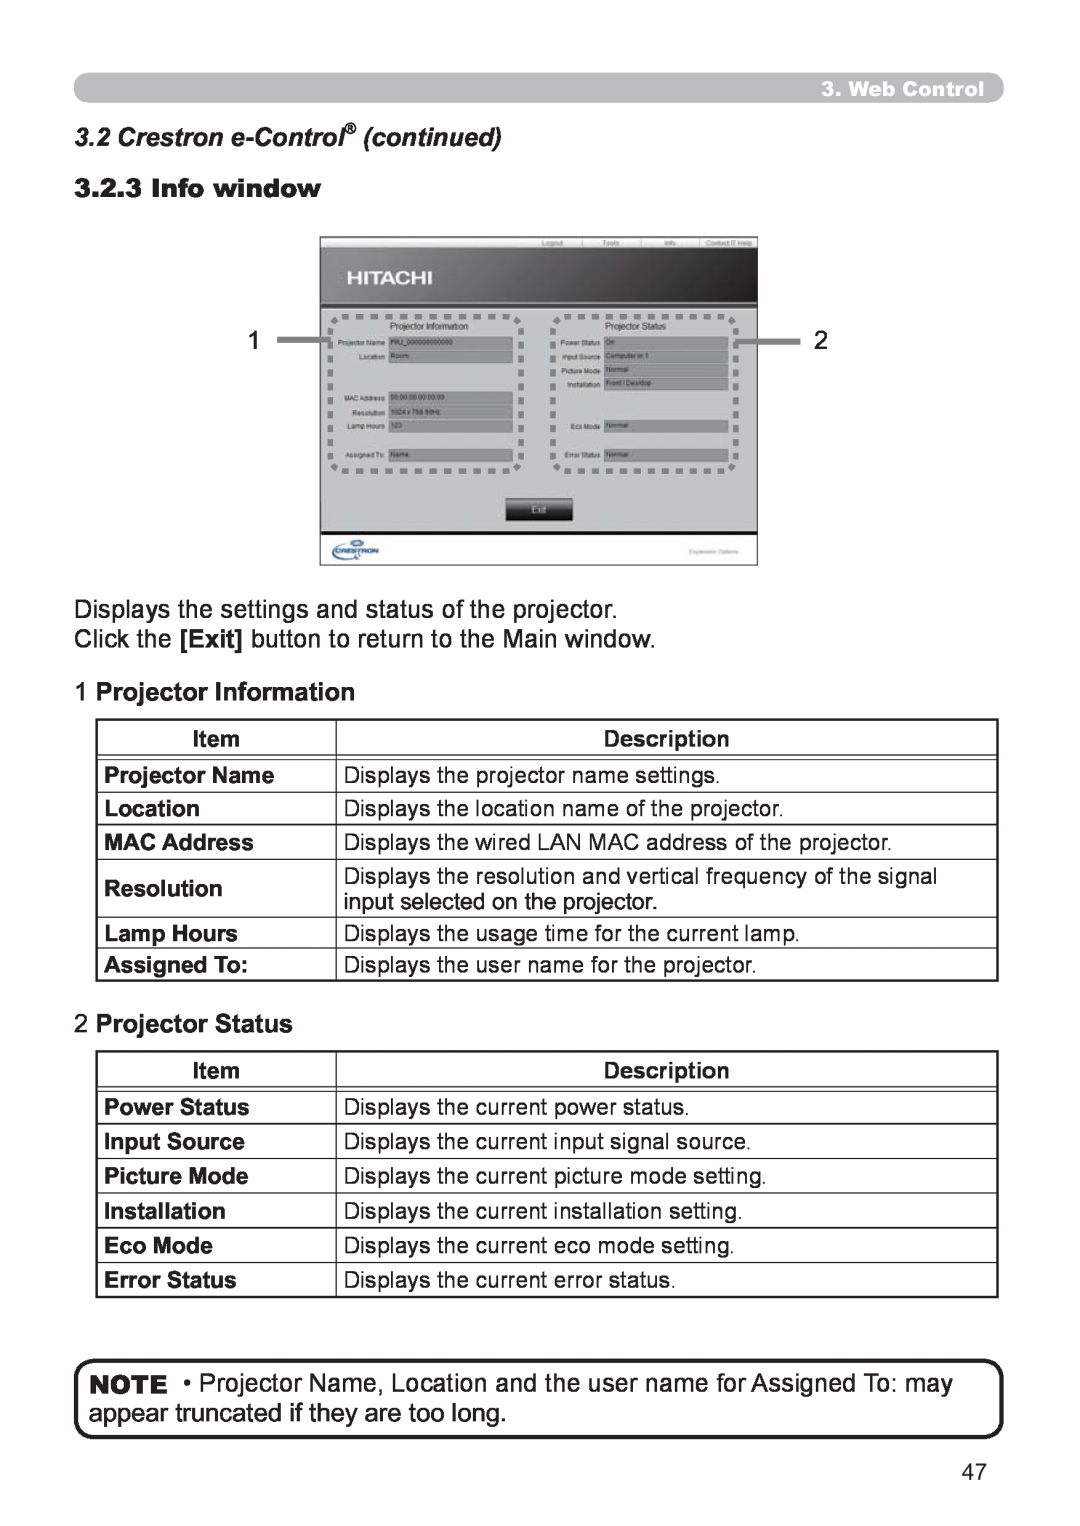 Hitachi CP-X2521WN user manual Crestron e-Control continued, Info window, Displays the settings and status of the projector 